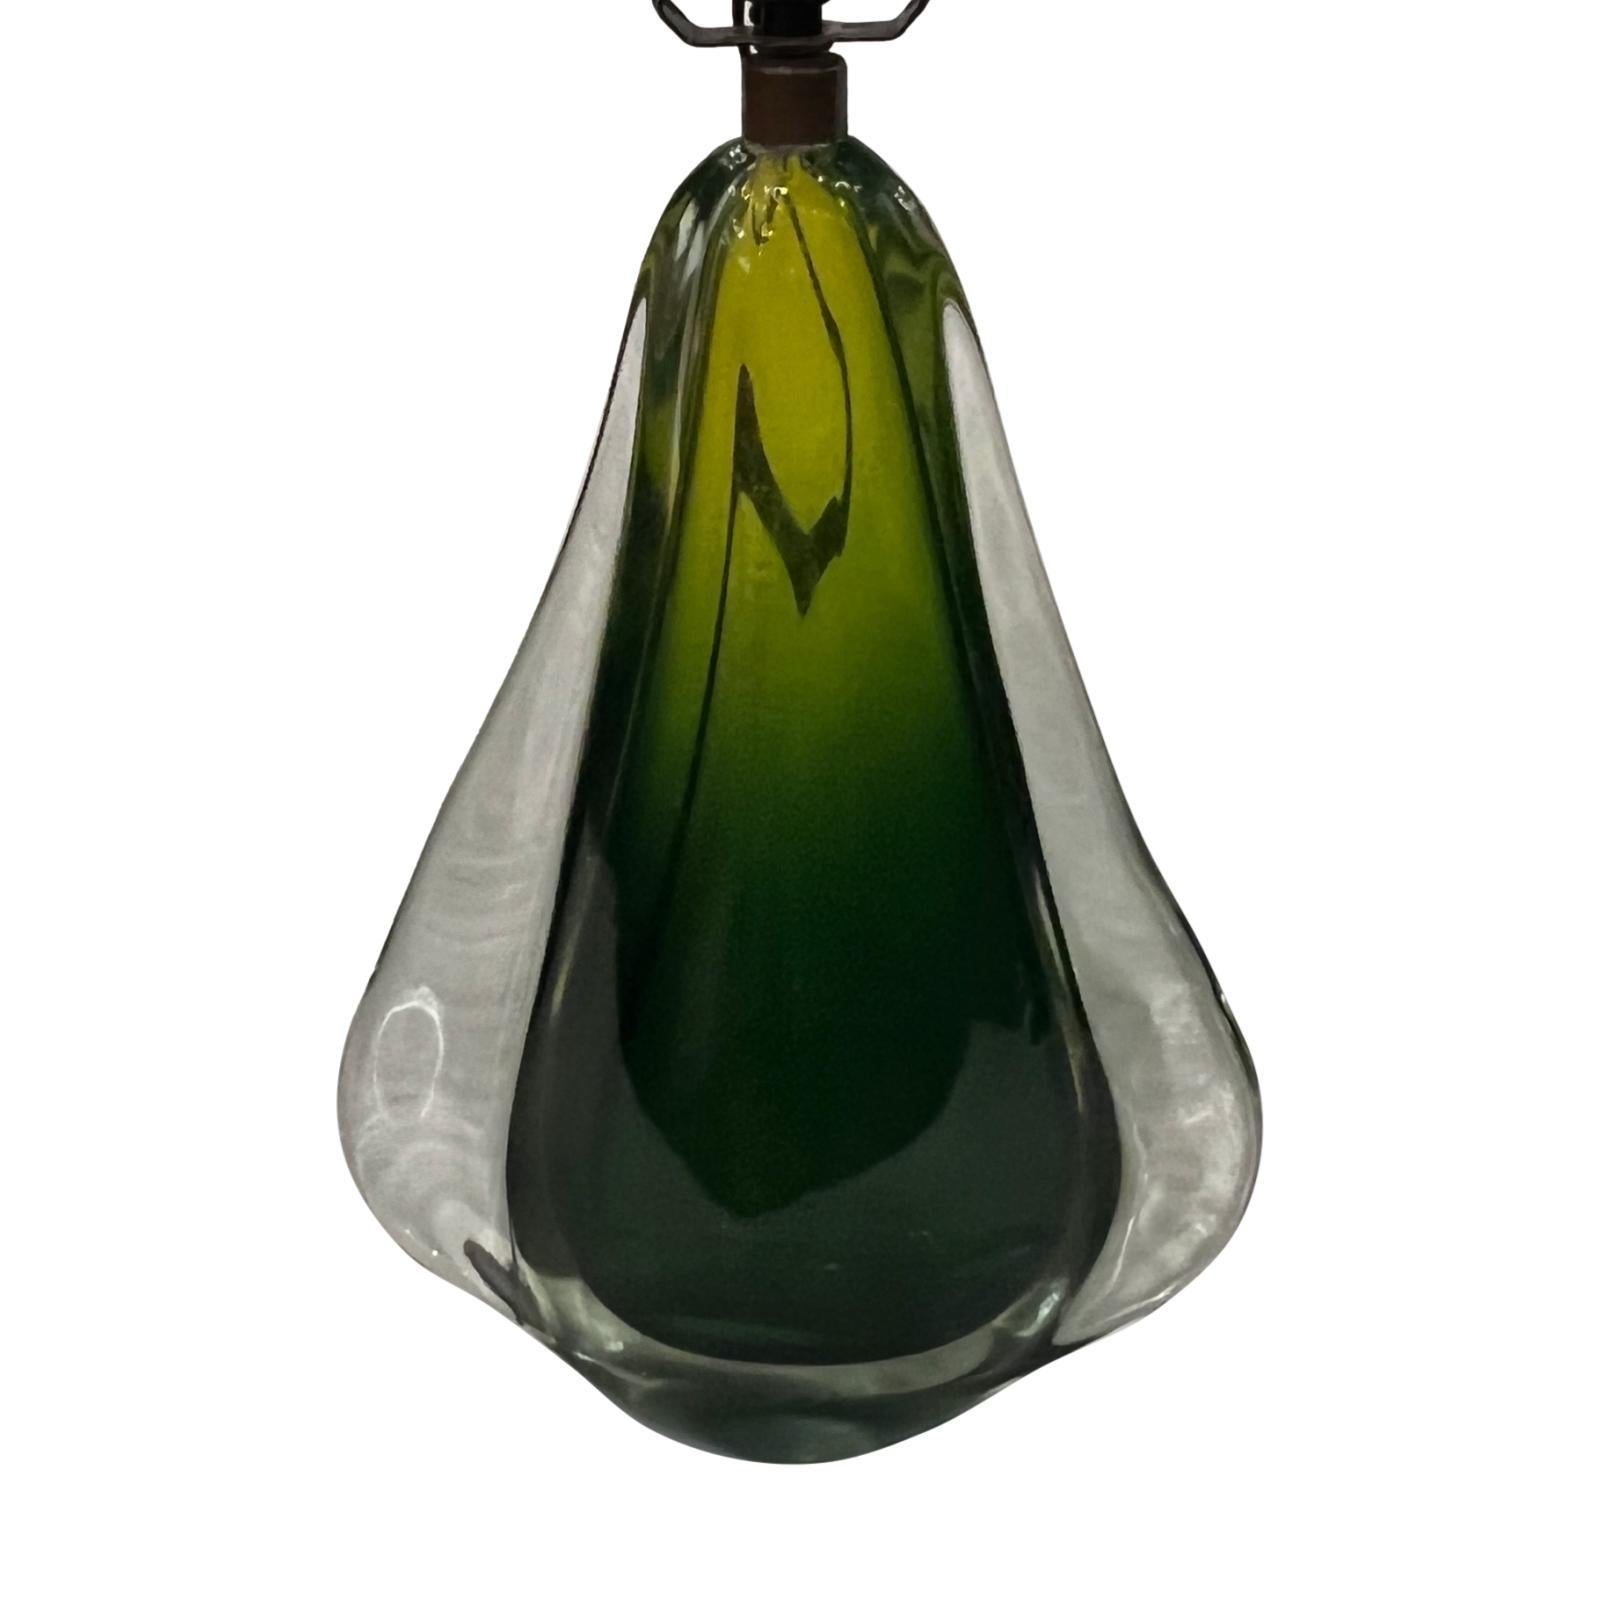 A circa 1960's Italian blown green and clear glass table lamp.

Measurements:
Height of body: 13